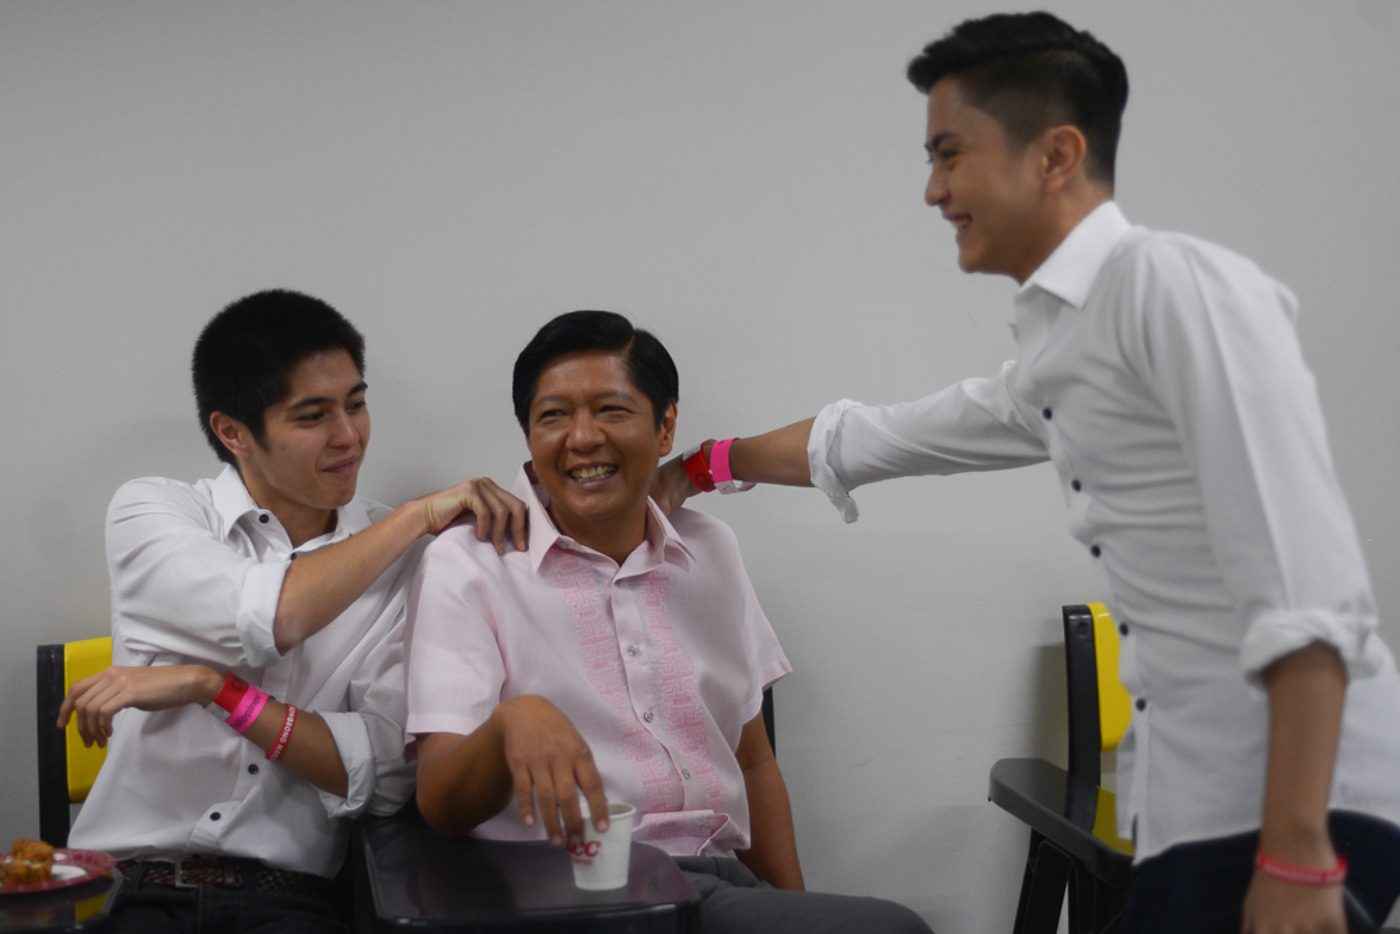 THE MEN. Senator Bongbong Marcos shares a light moment with his sons Simon and Sandro inside their holding room. Photo by Jansen Romero   